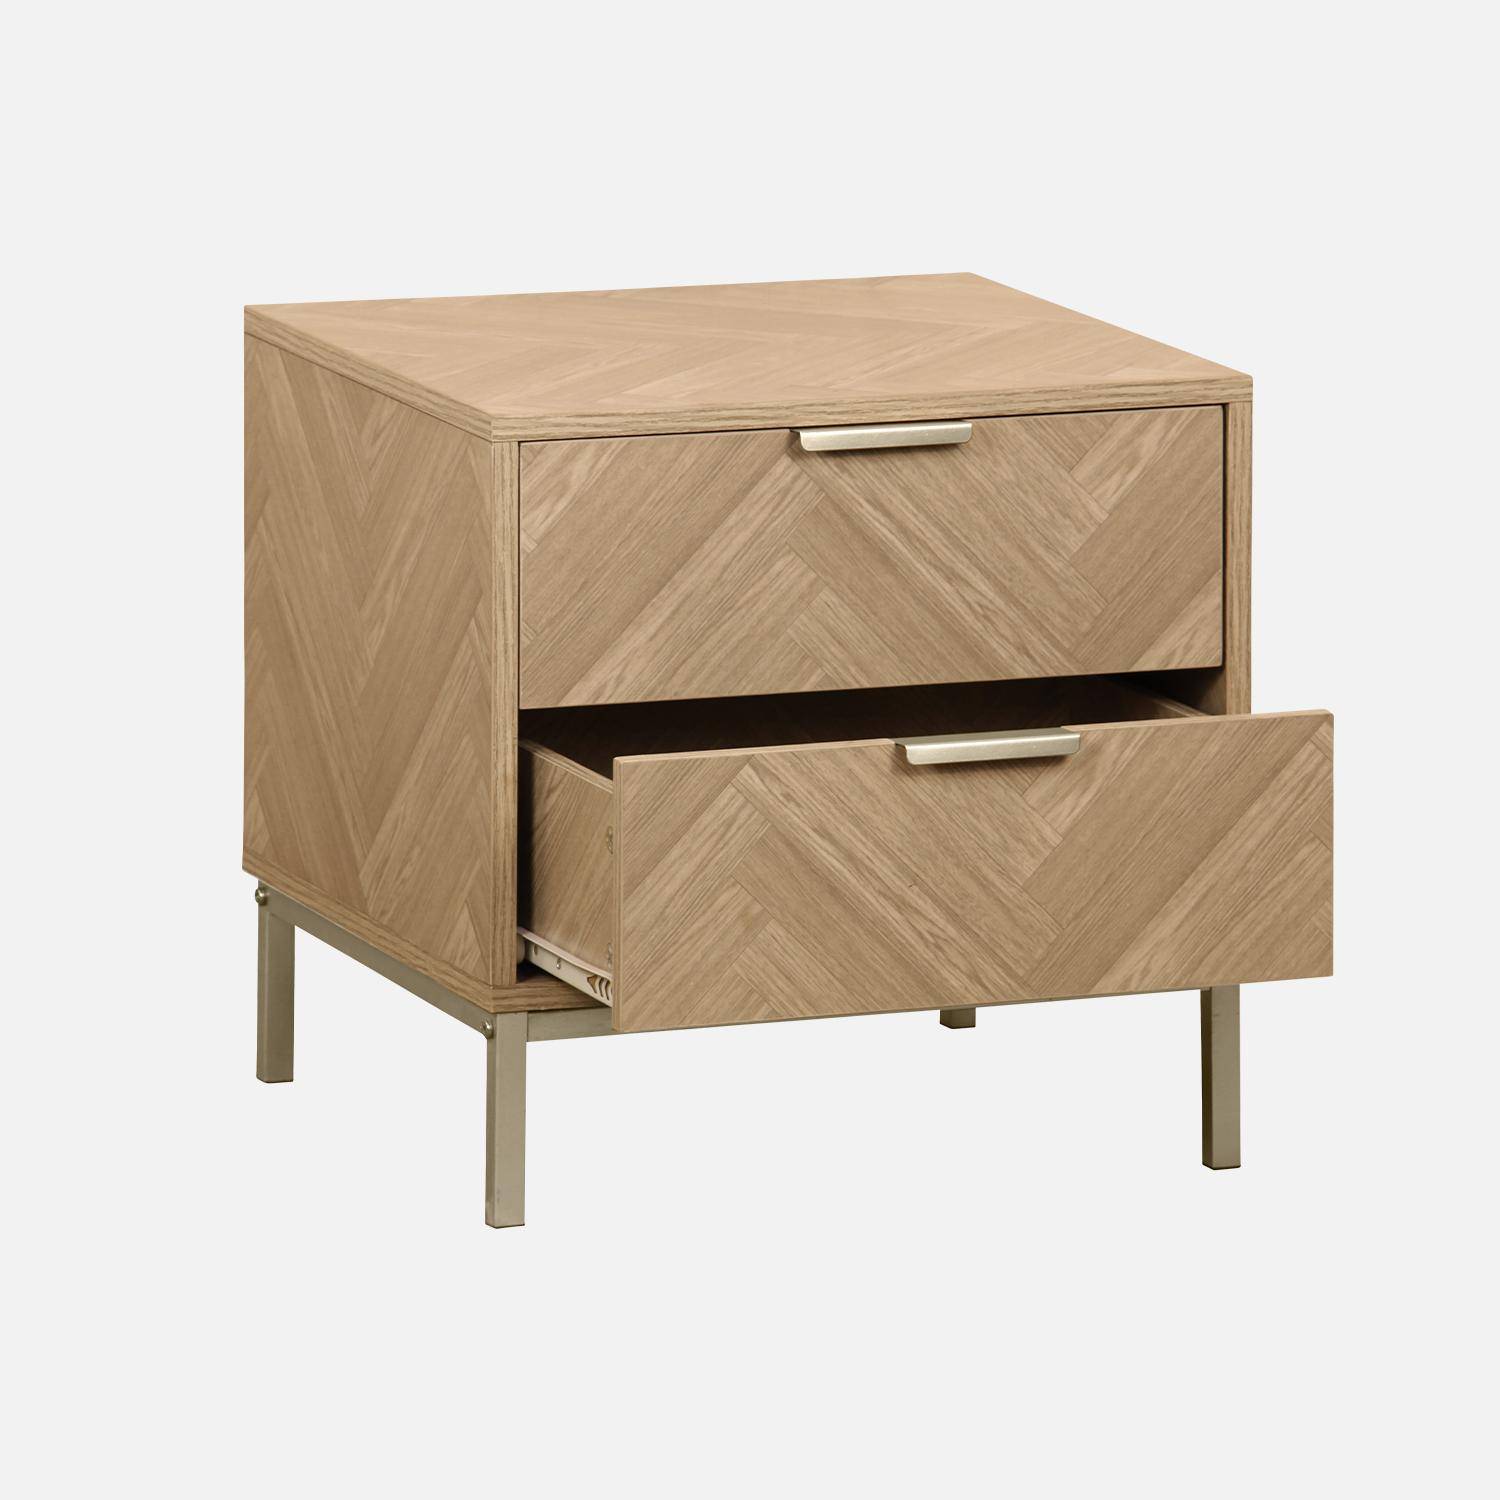 Pair of  contemporary Herringbone bedside table with 2 drawers Photo5